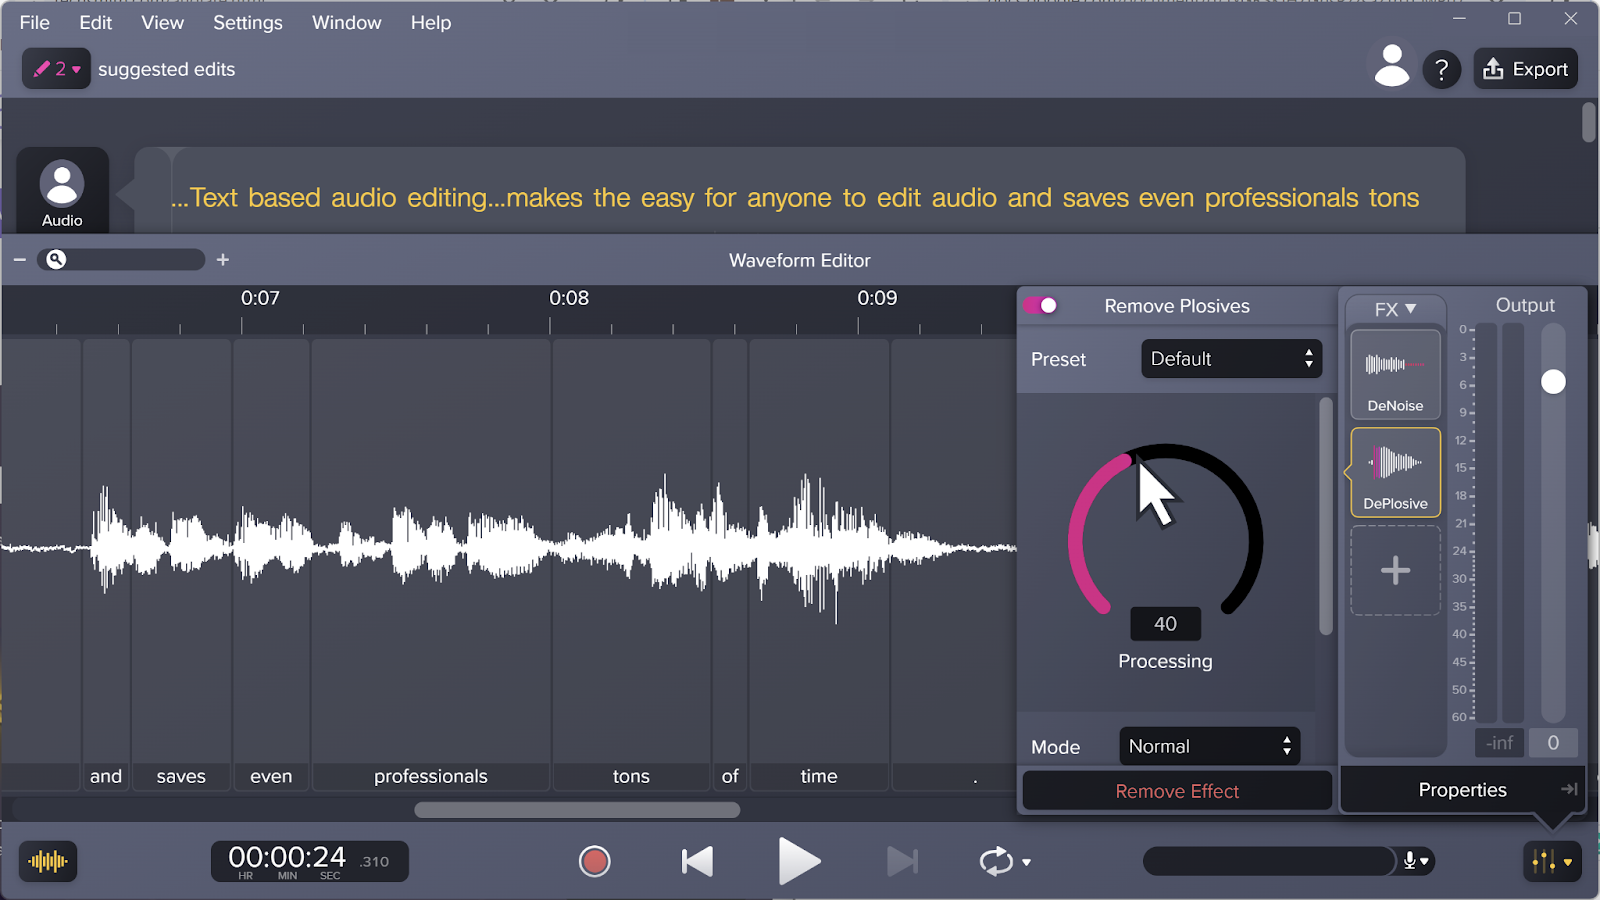 Image of Audiate voice editor software that minimizes plosives with the Remove Plosives effect.